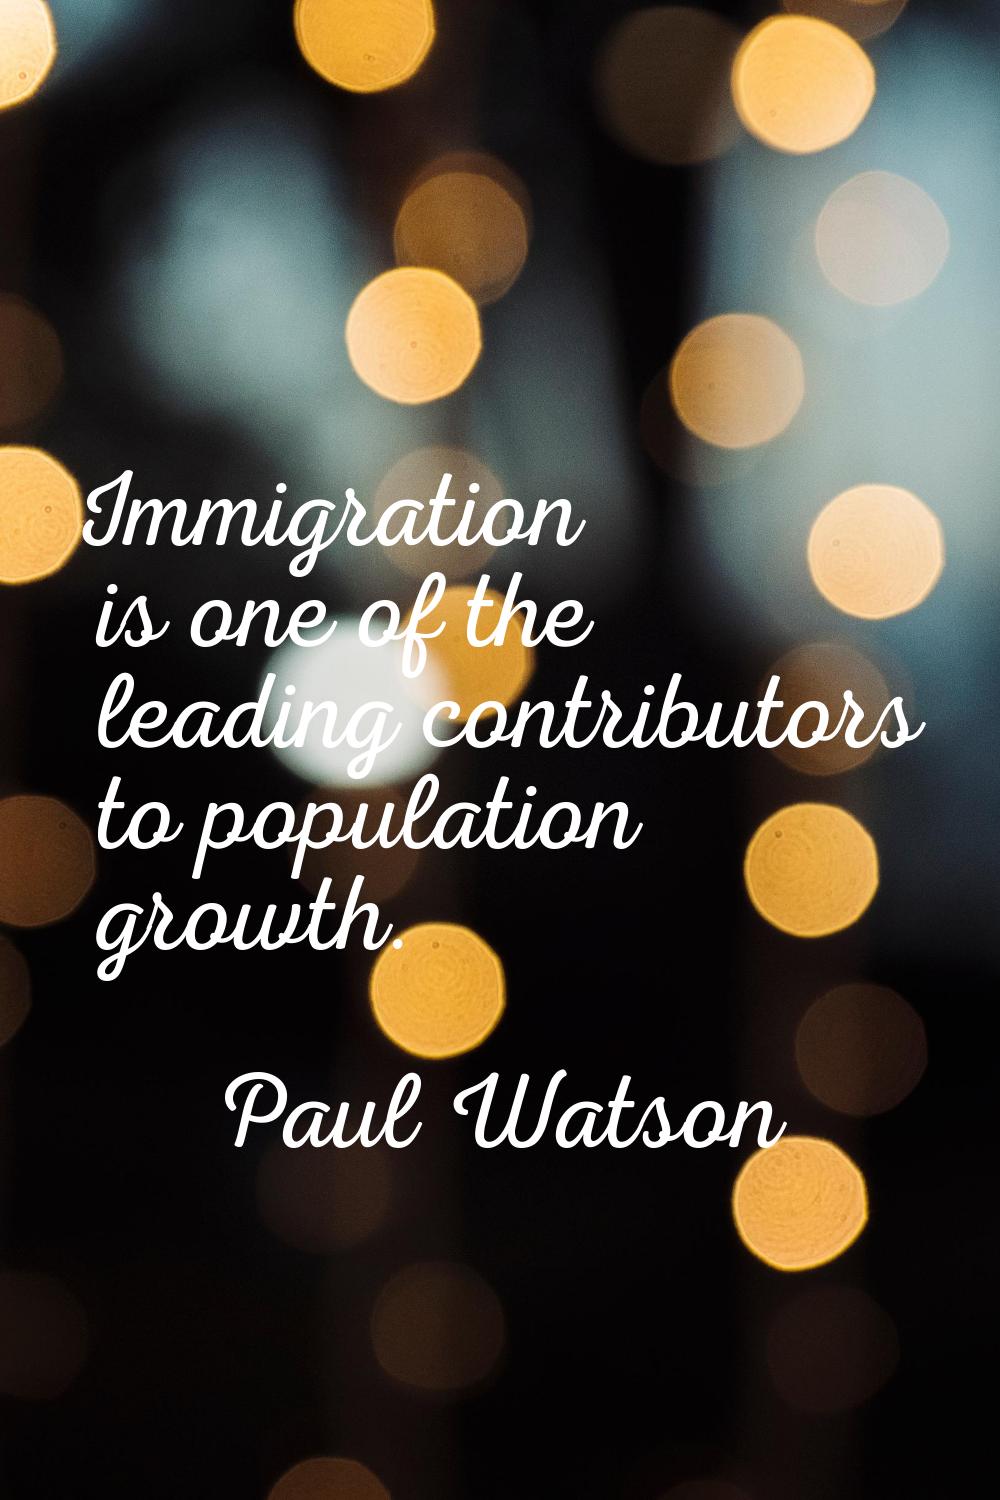 Immigration is one of the leading contributors to population growth.